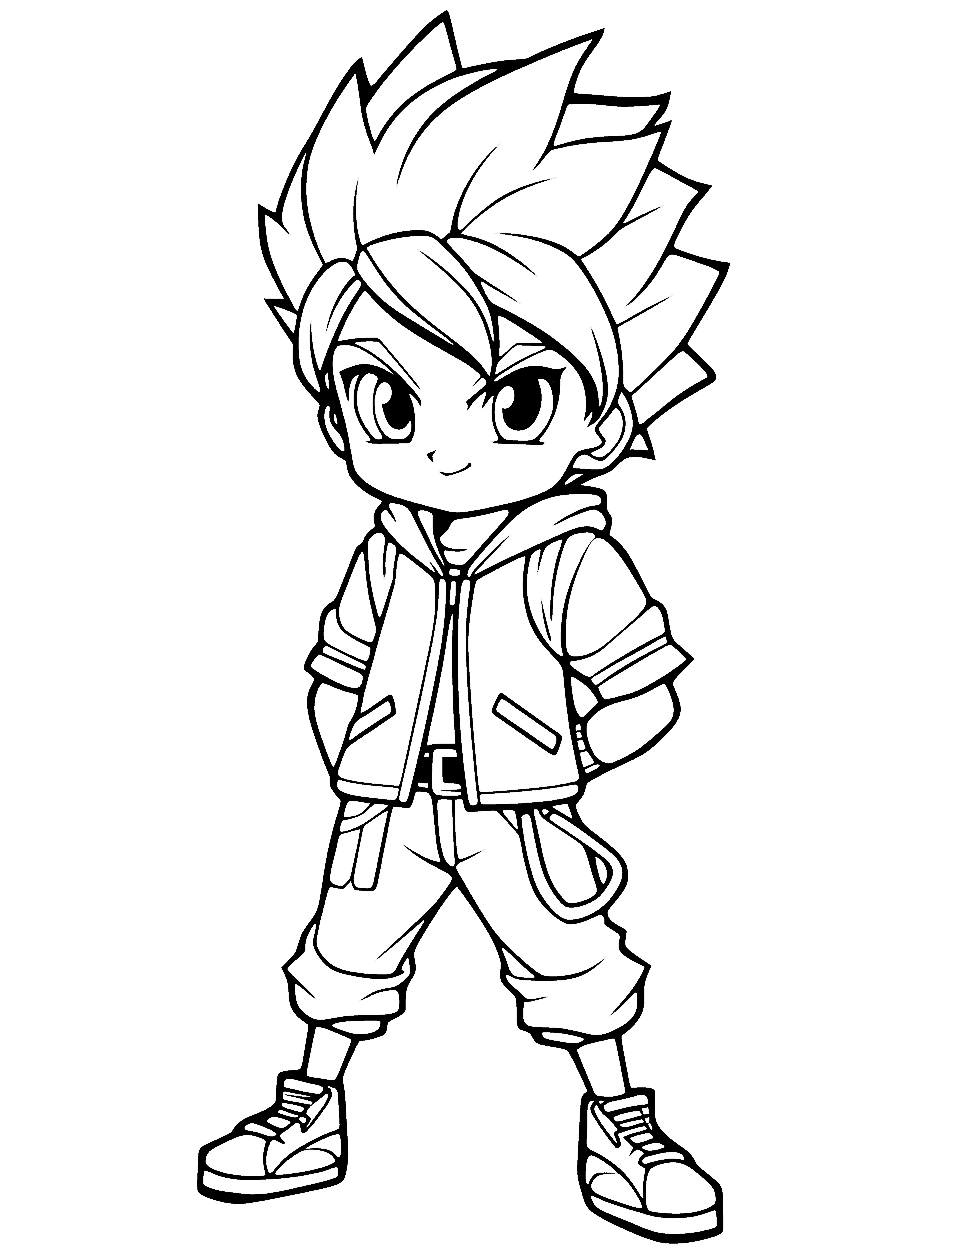 Cool Anime Chibi Character Coloring Page - A cool anime chibi character with a stylish outfit and a cool pose.